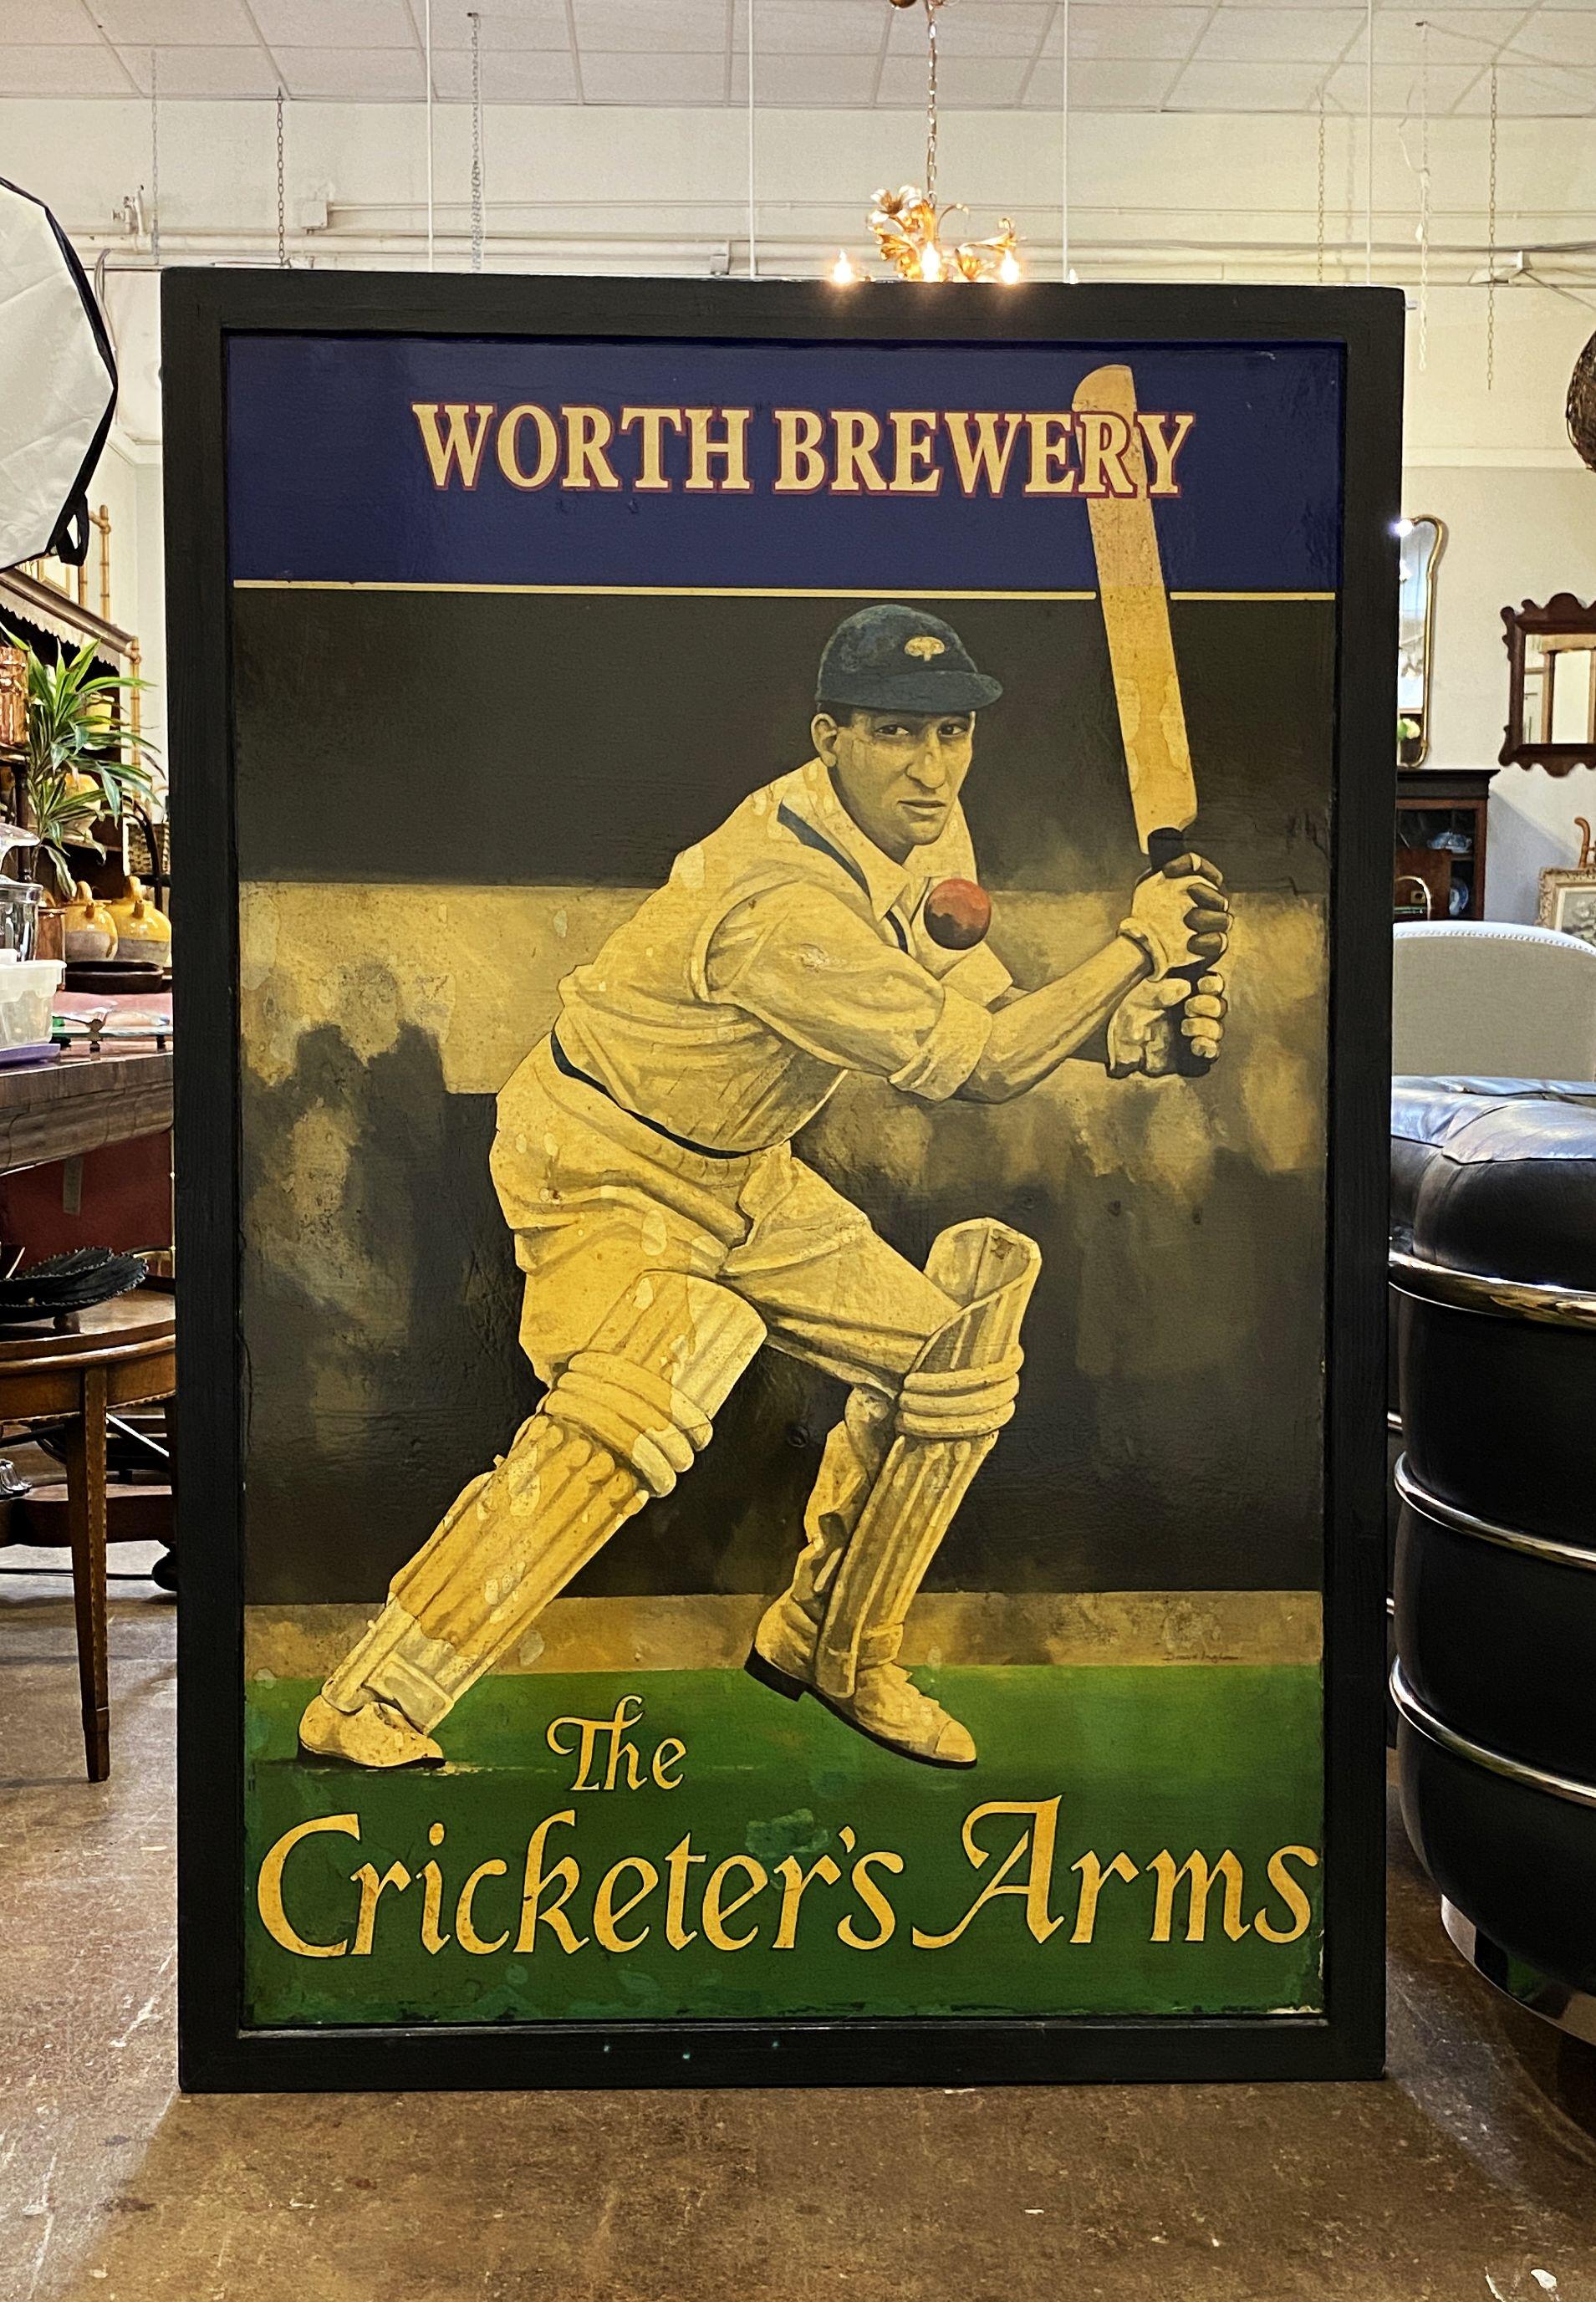 An authentic English pub sign (one-sided) featuring a painting of a cricket player with bat and ball, entitled: Worth Brewery - The Cricketer's Arms.

A very fine example of vintage advertising artwork, ready for display.

